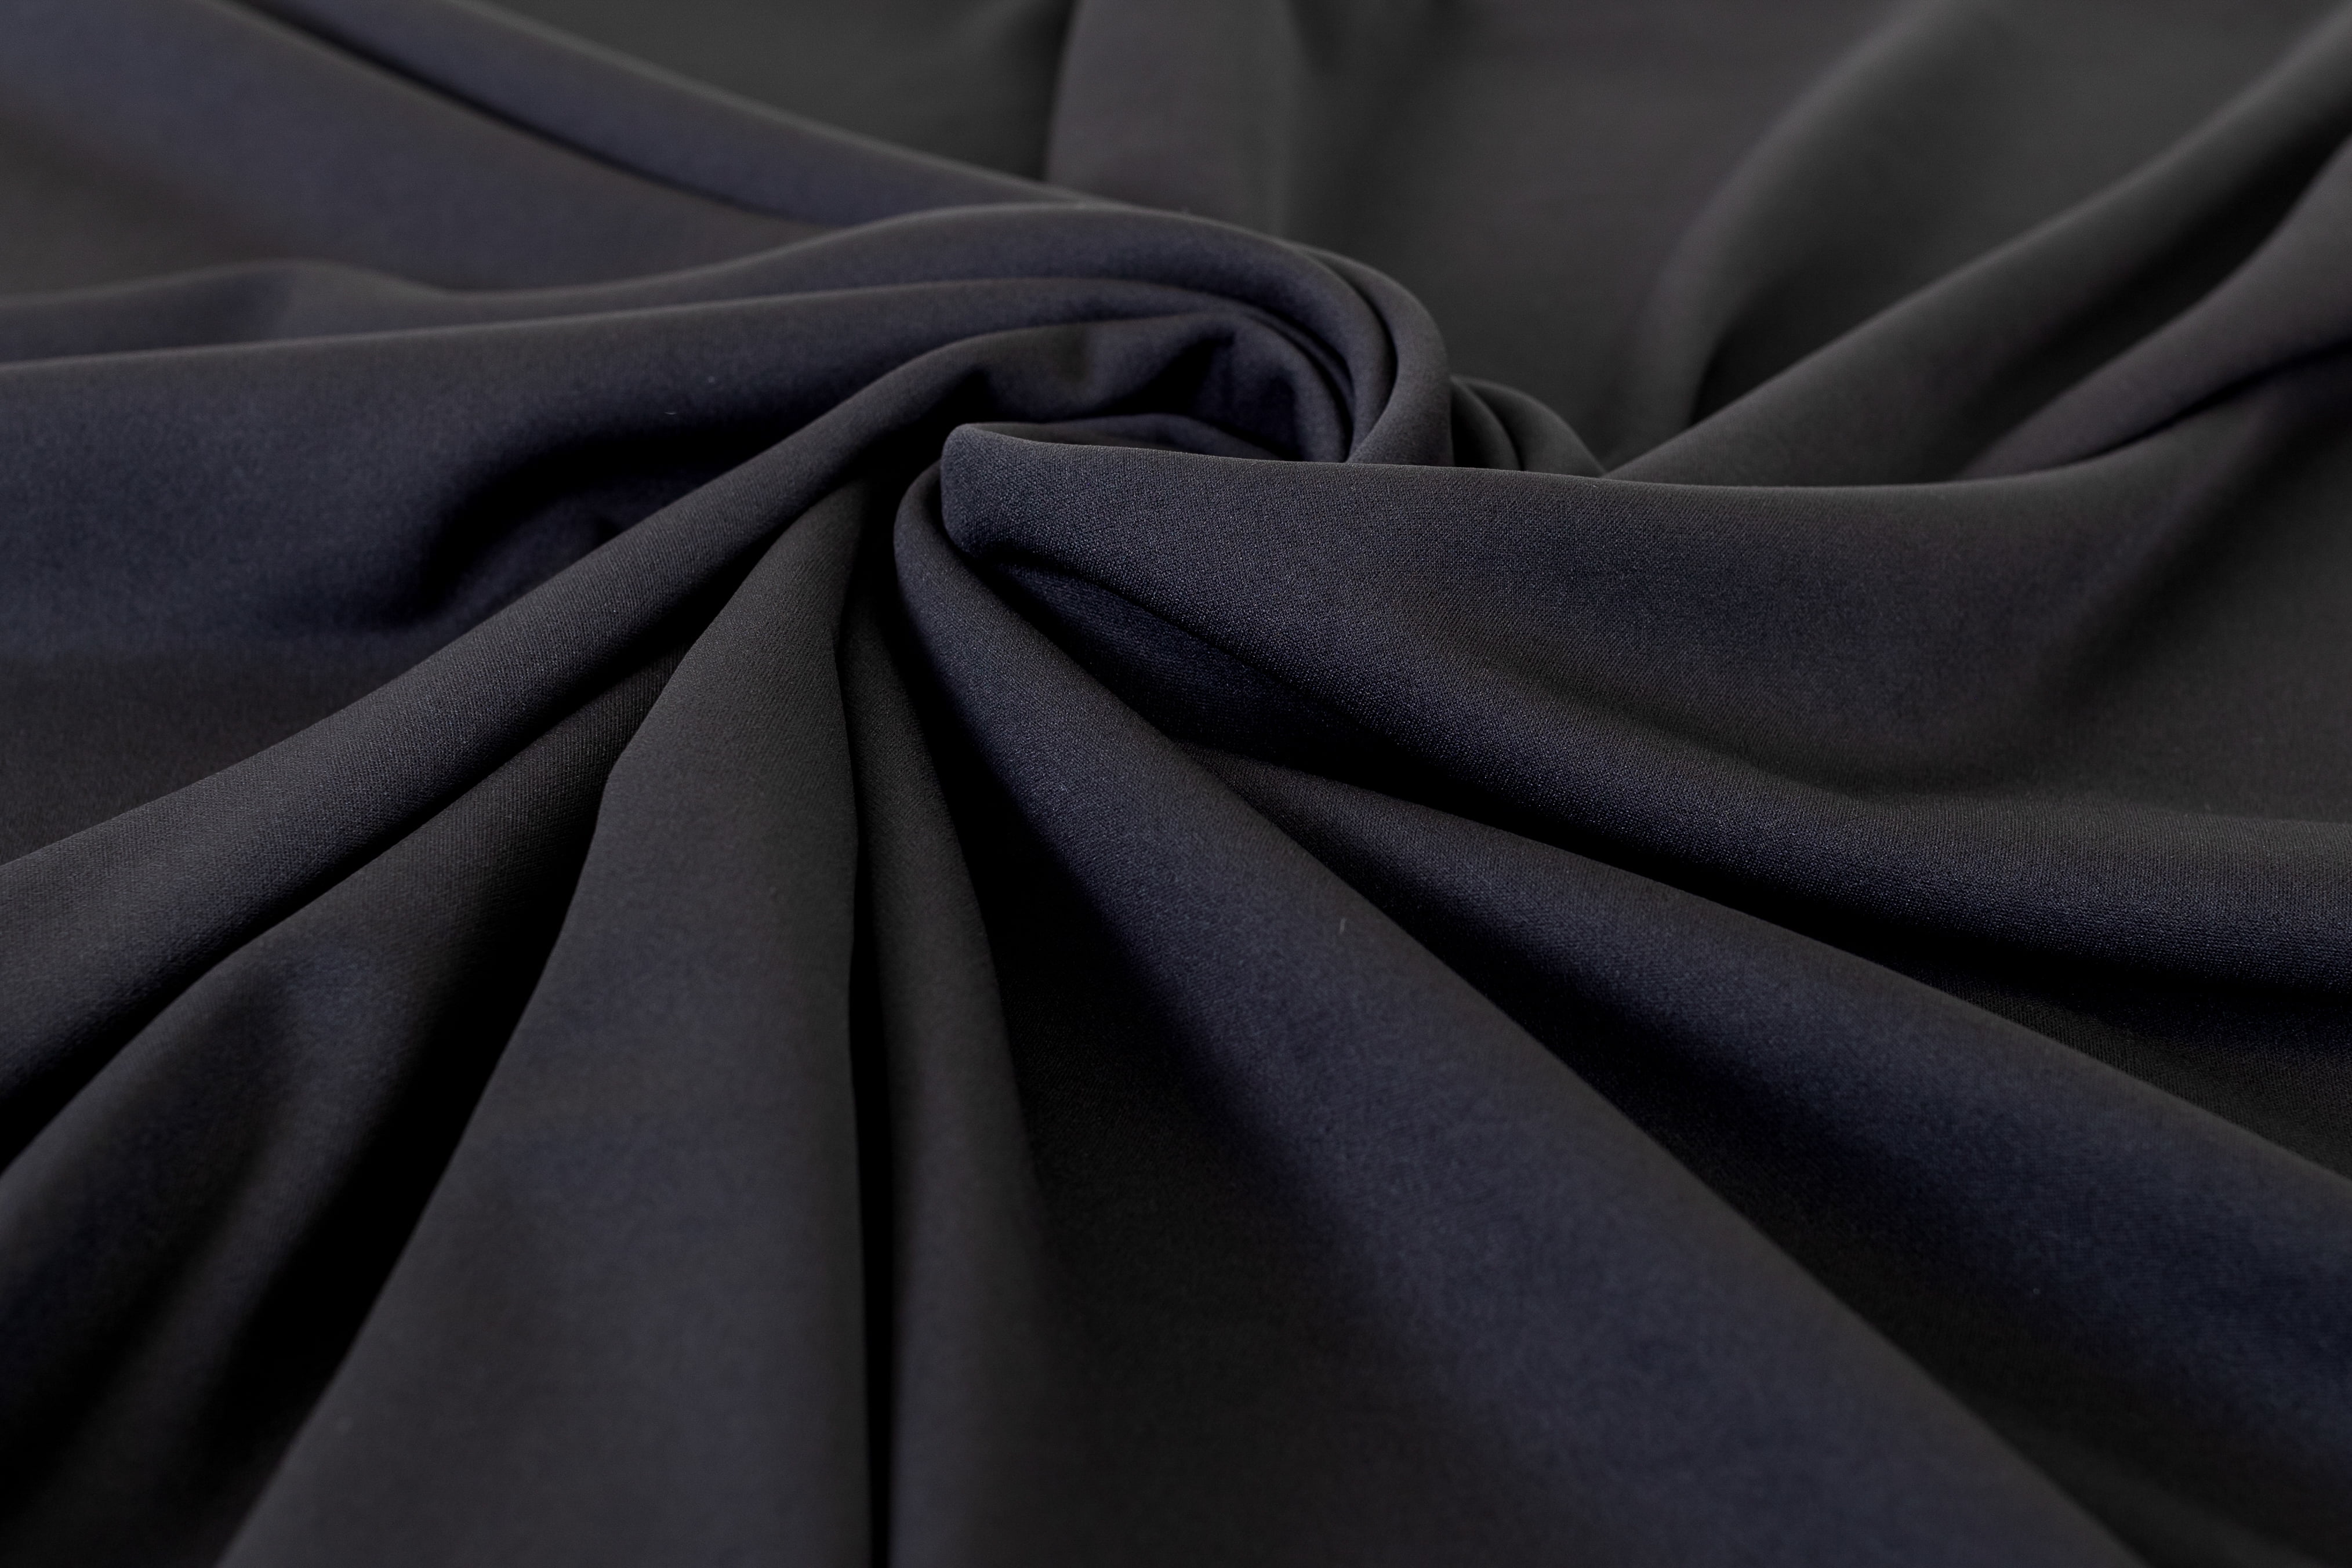 Black Plain Soft Leather Look Crepe Dress Drape Craft Fabric 44" By The Meter 